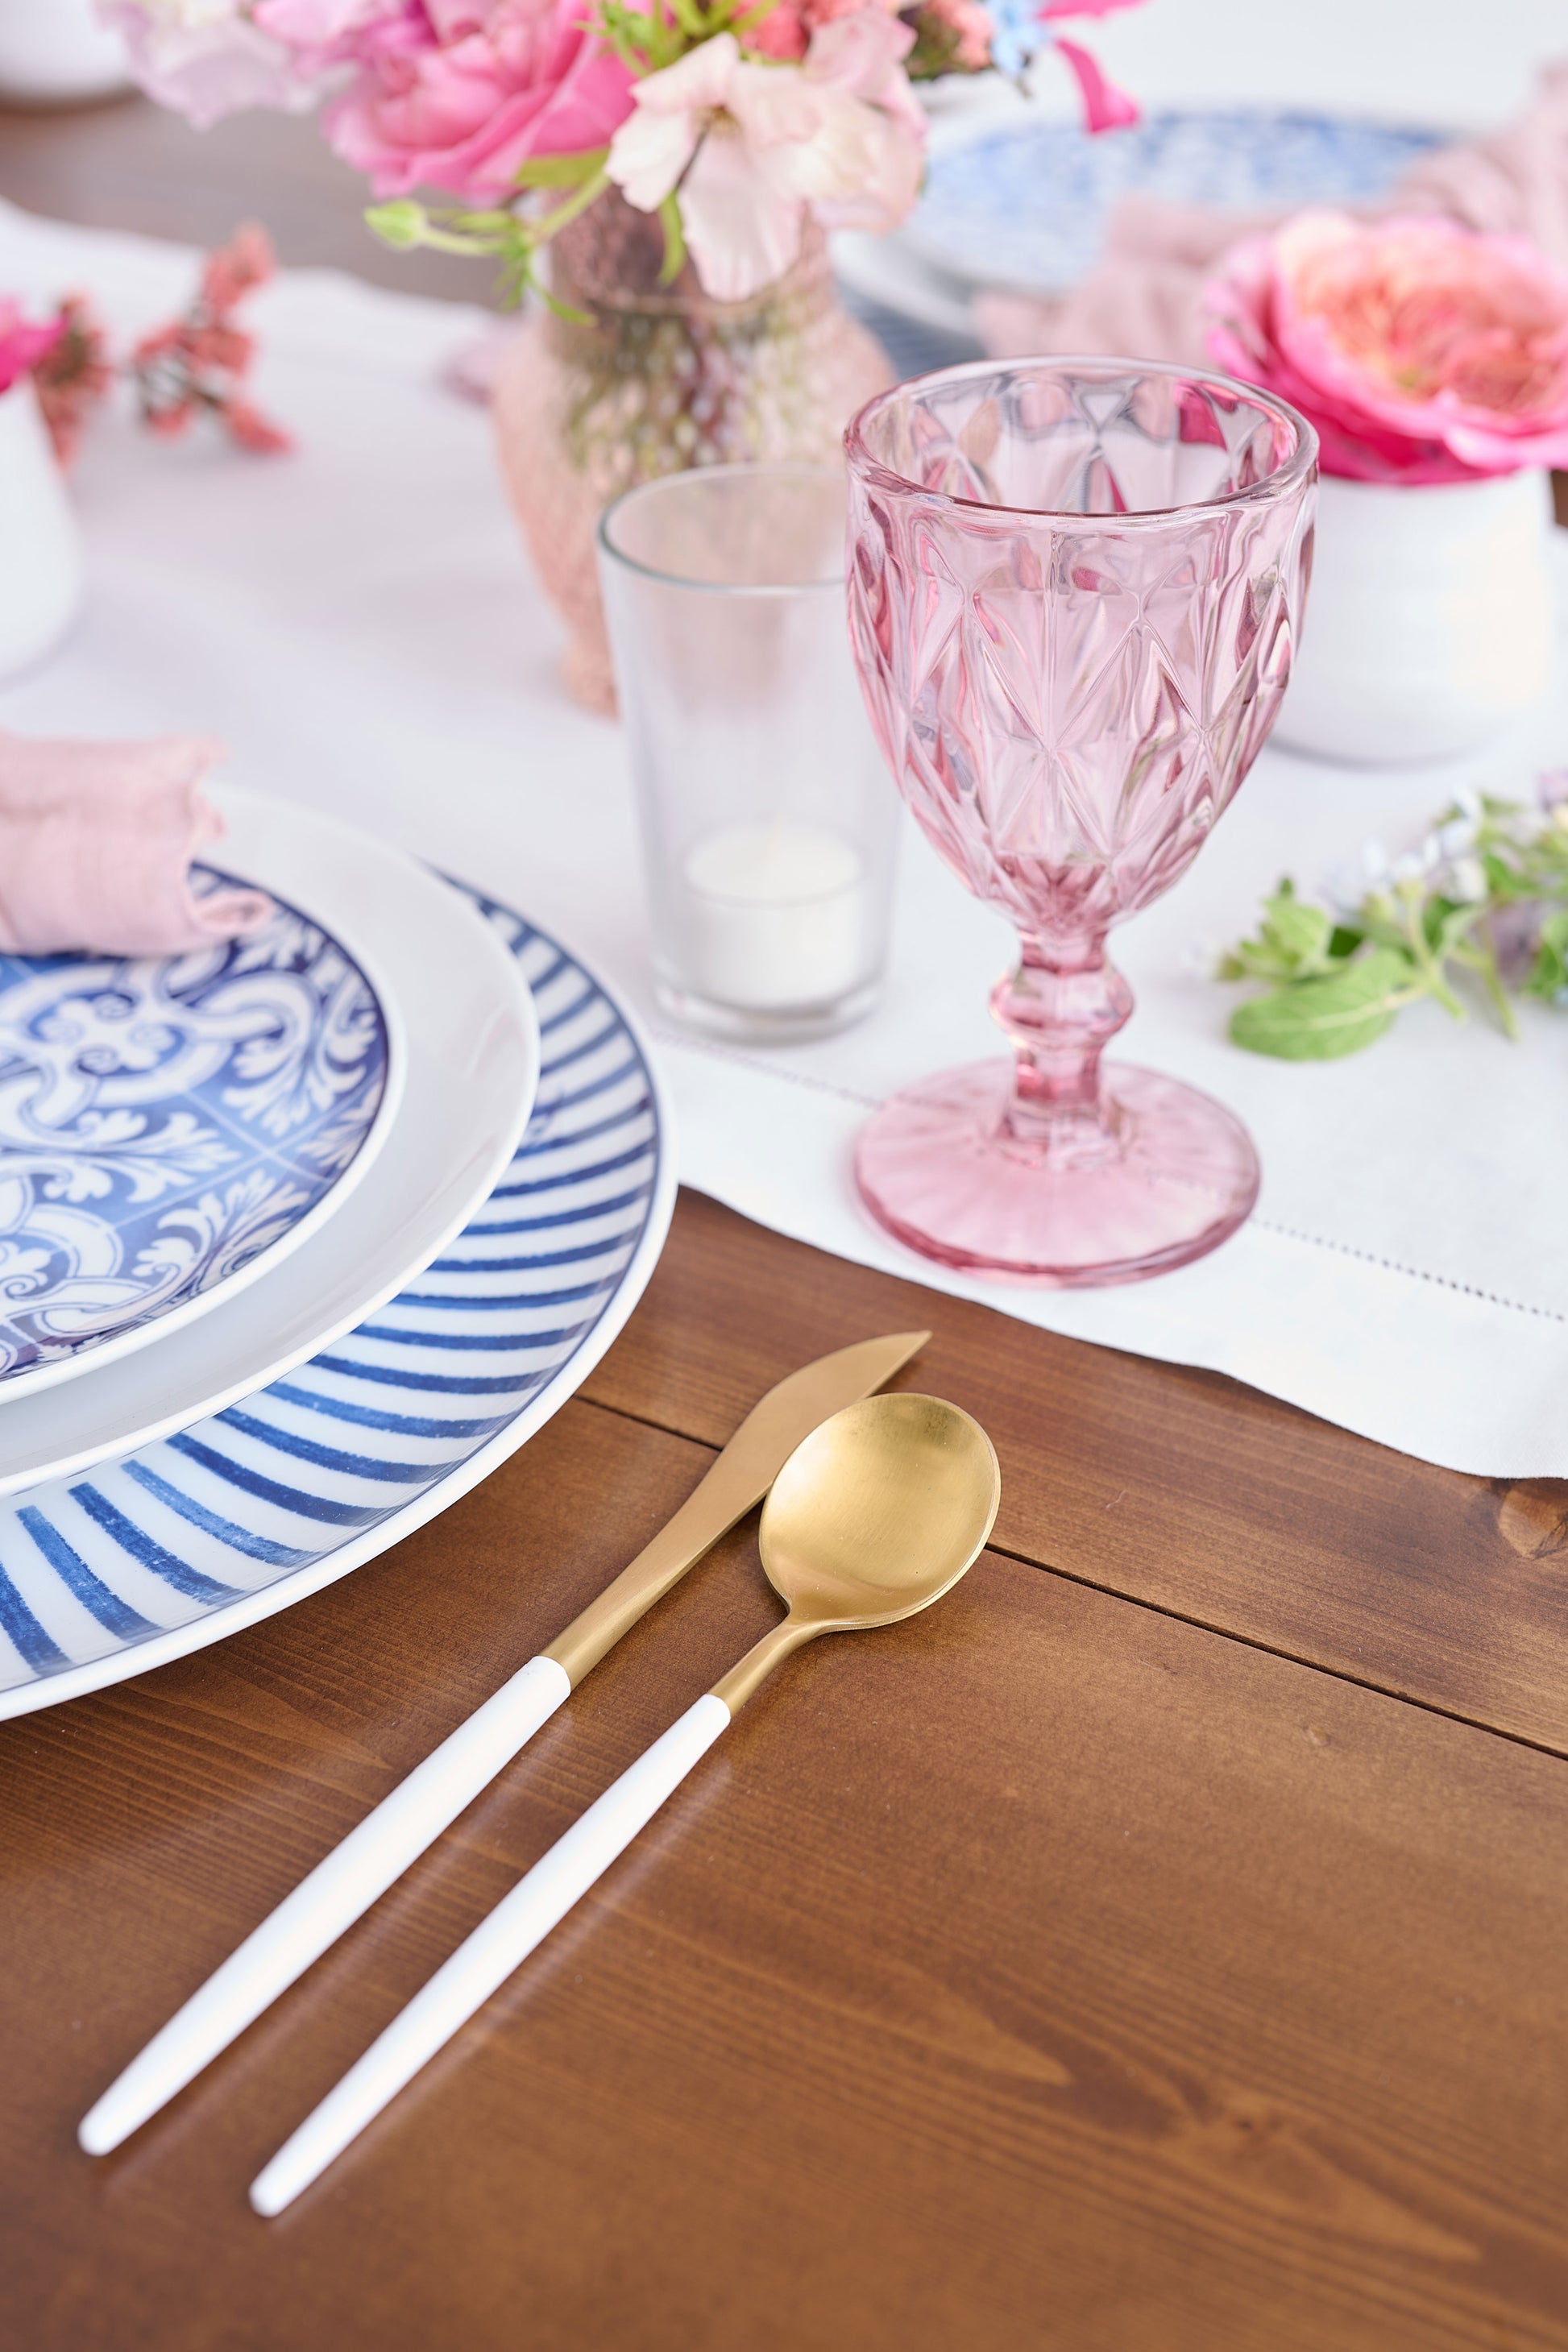 Tabletop setting with blue and white pattern dishes with pink florals, pink waterglass, and gold hardware.